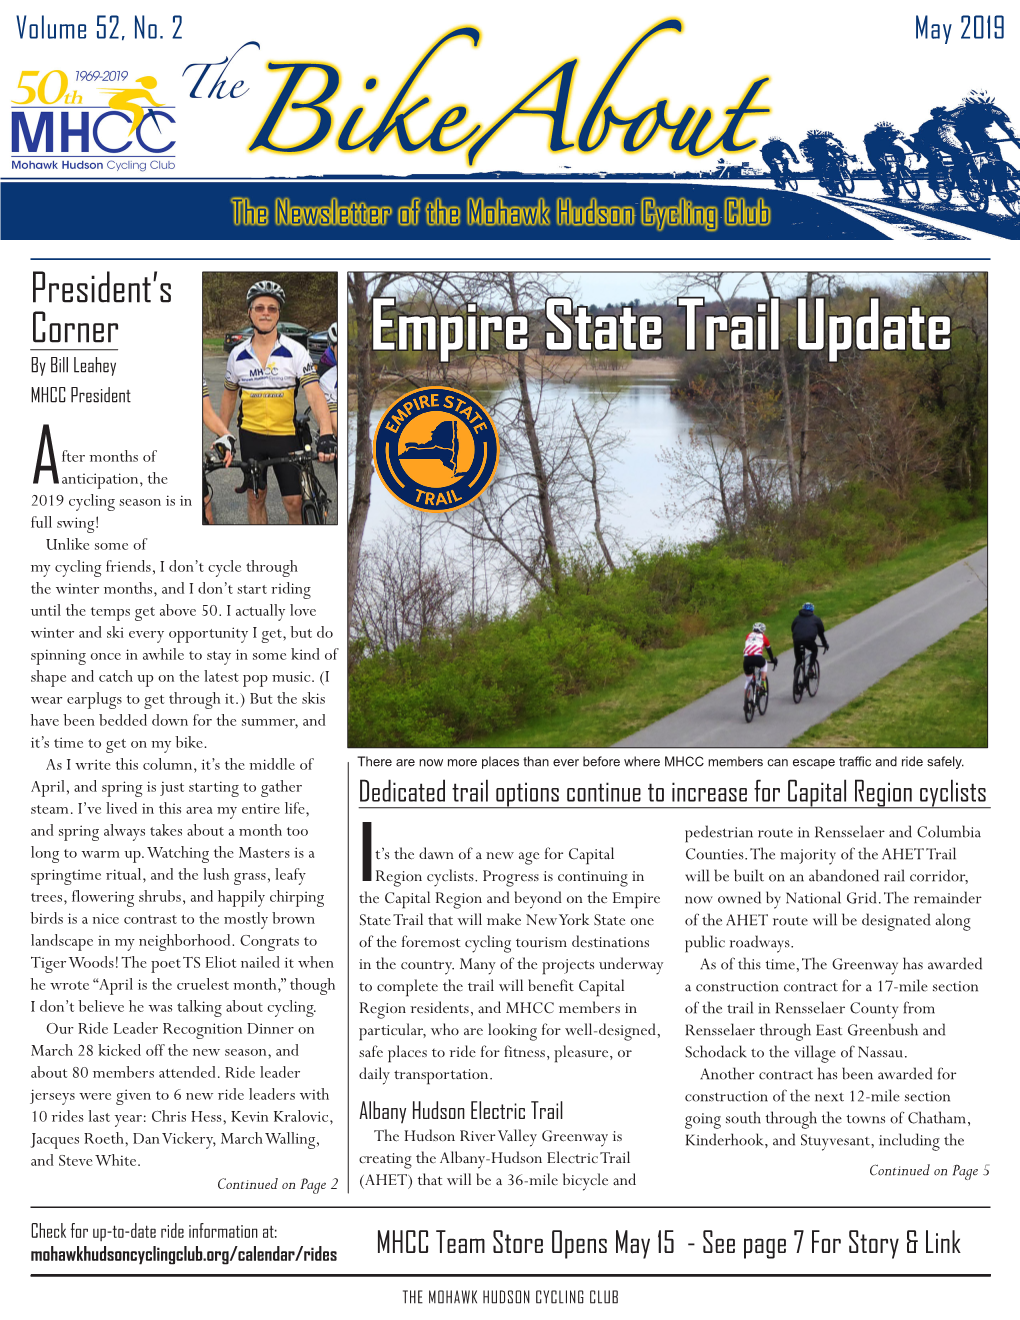 Empire State Trail Update by Bill Leahey MHCC President